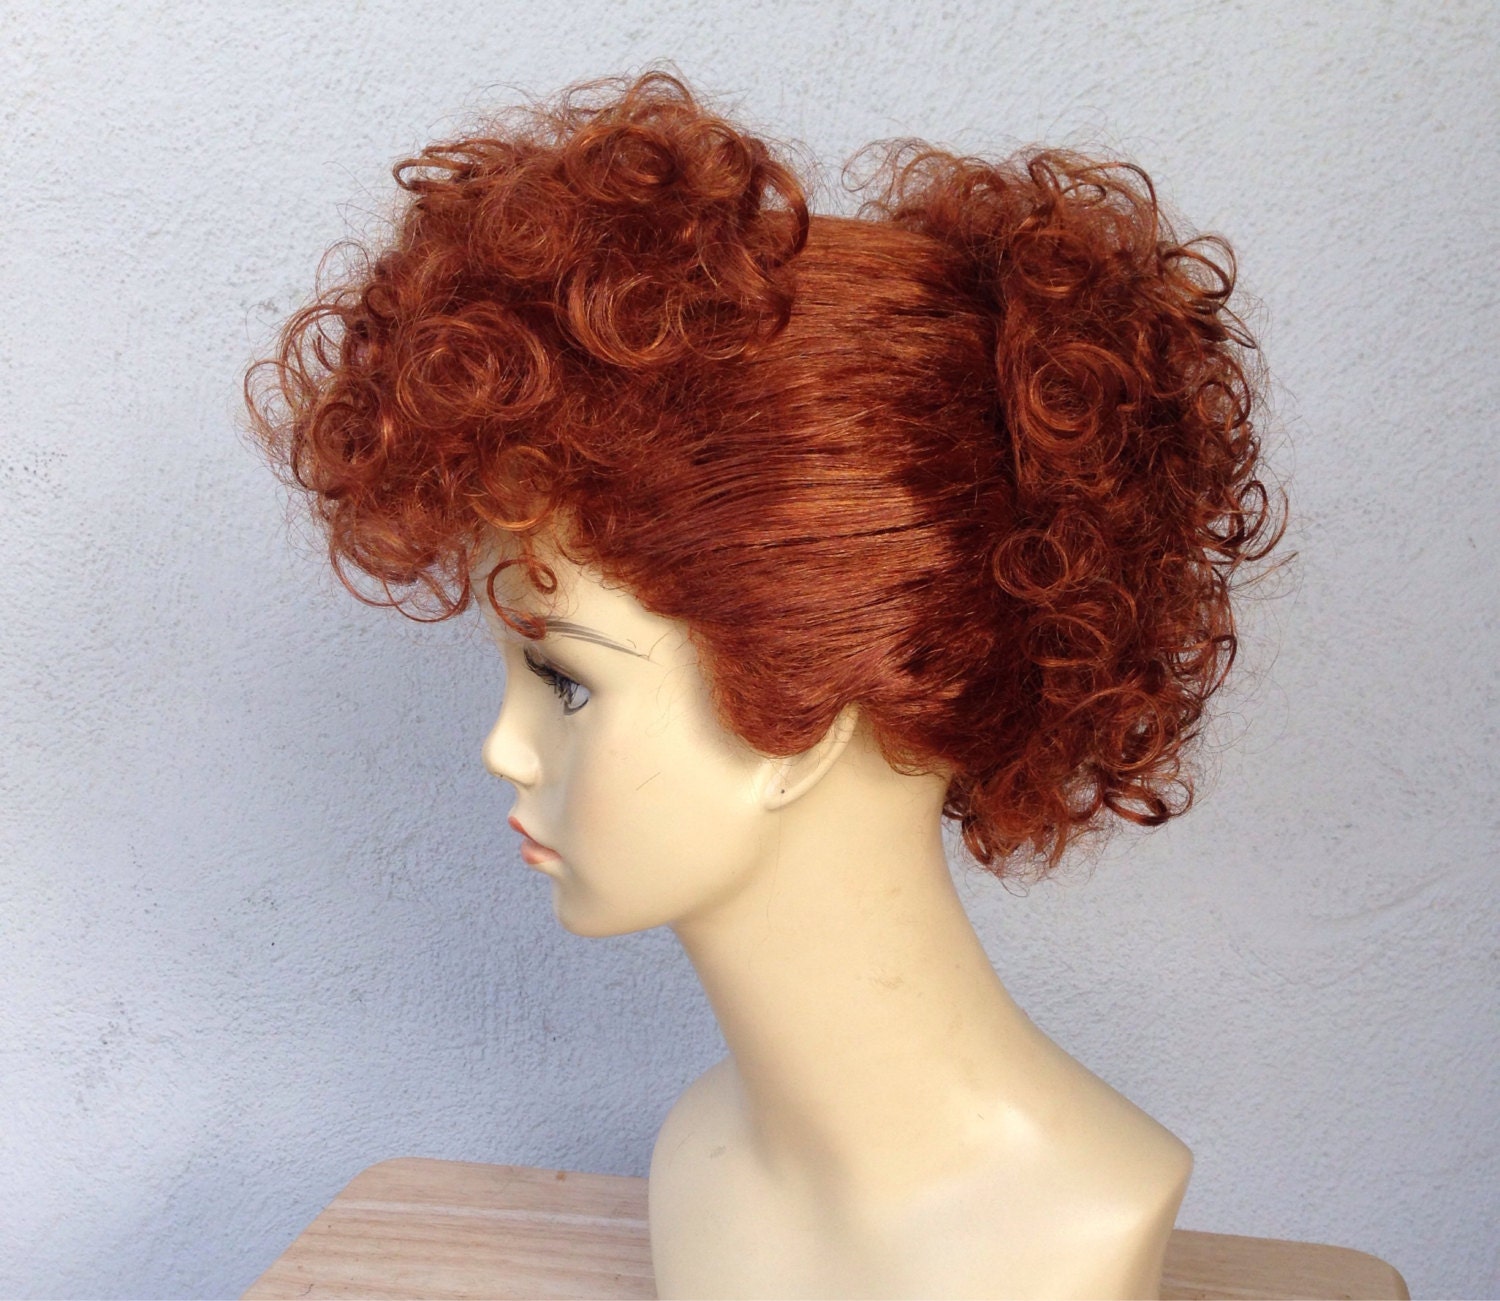 Lucille Ball I Love Lucy Adult Costume Wig By Littlepennylane 